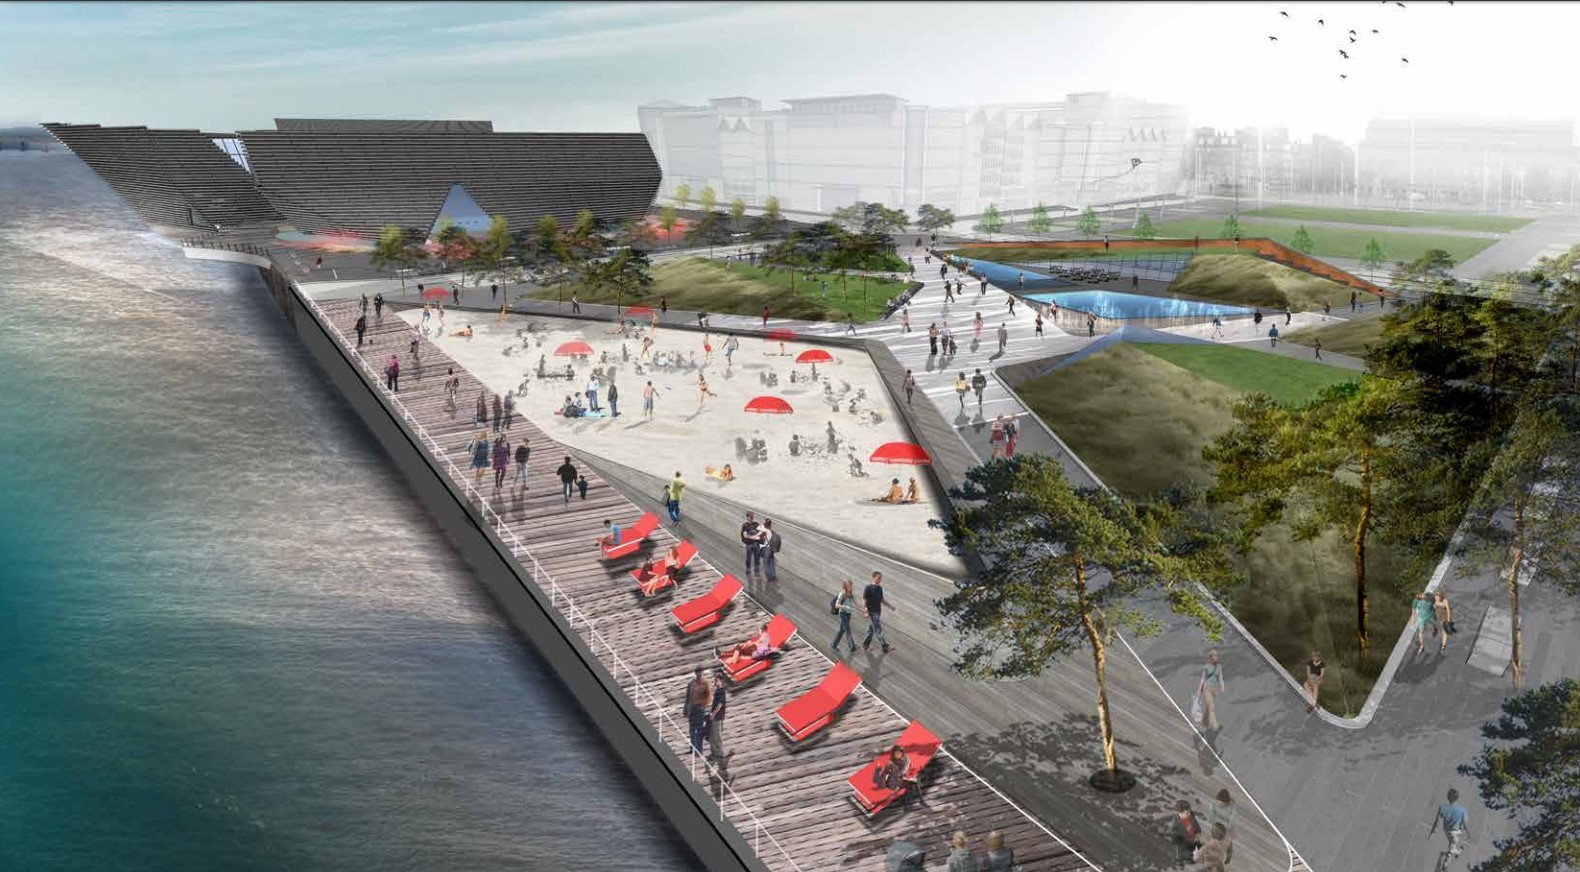 Free wifi is part of plans to make Dundee waterfront a lure for tourists and city folk alike.